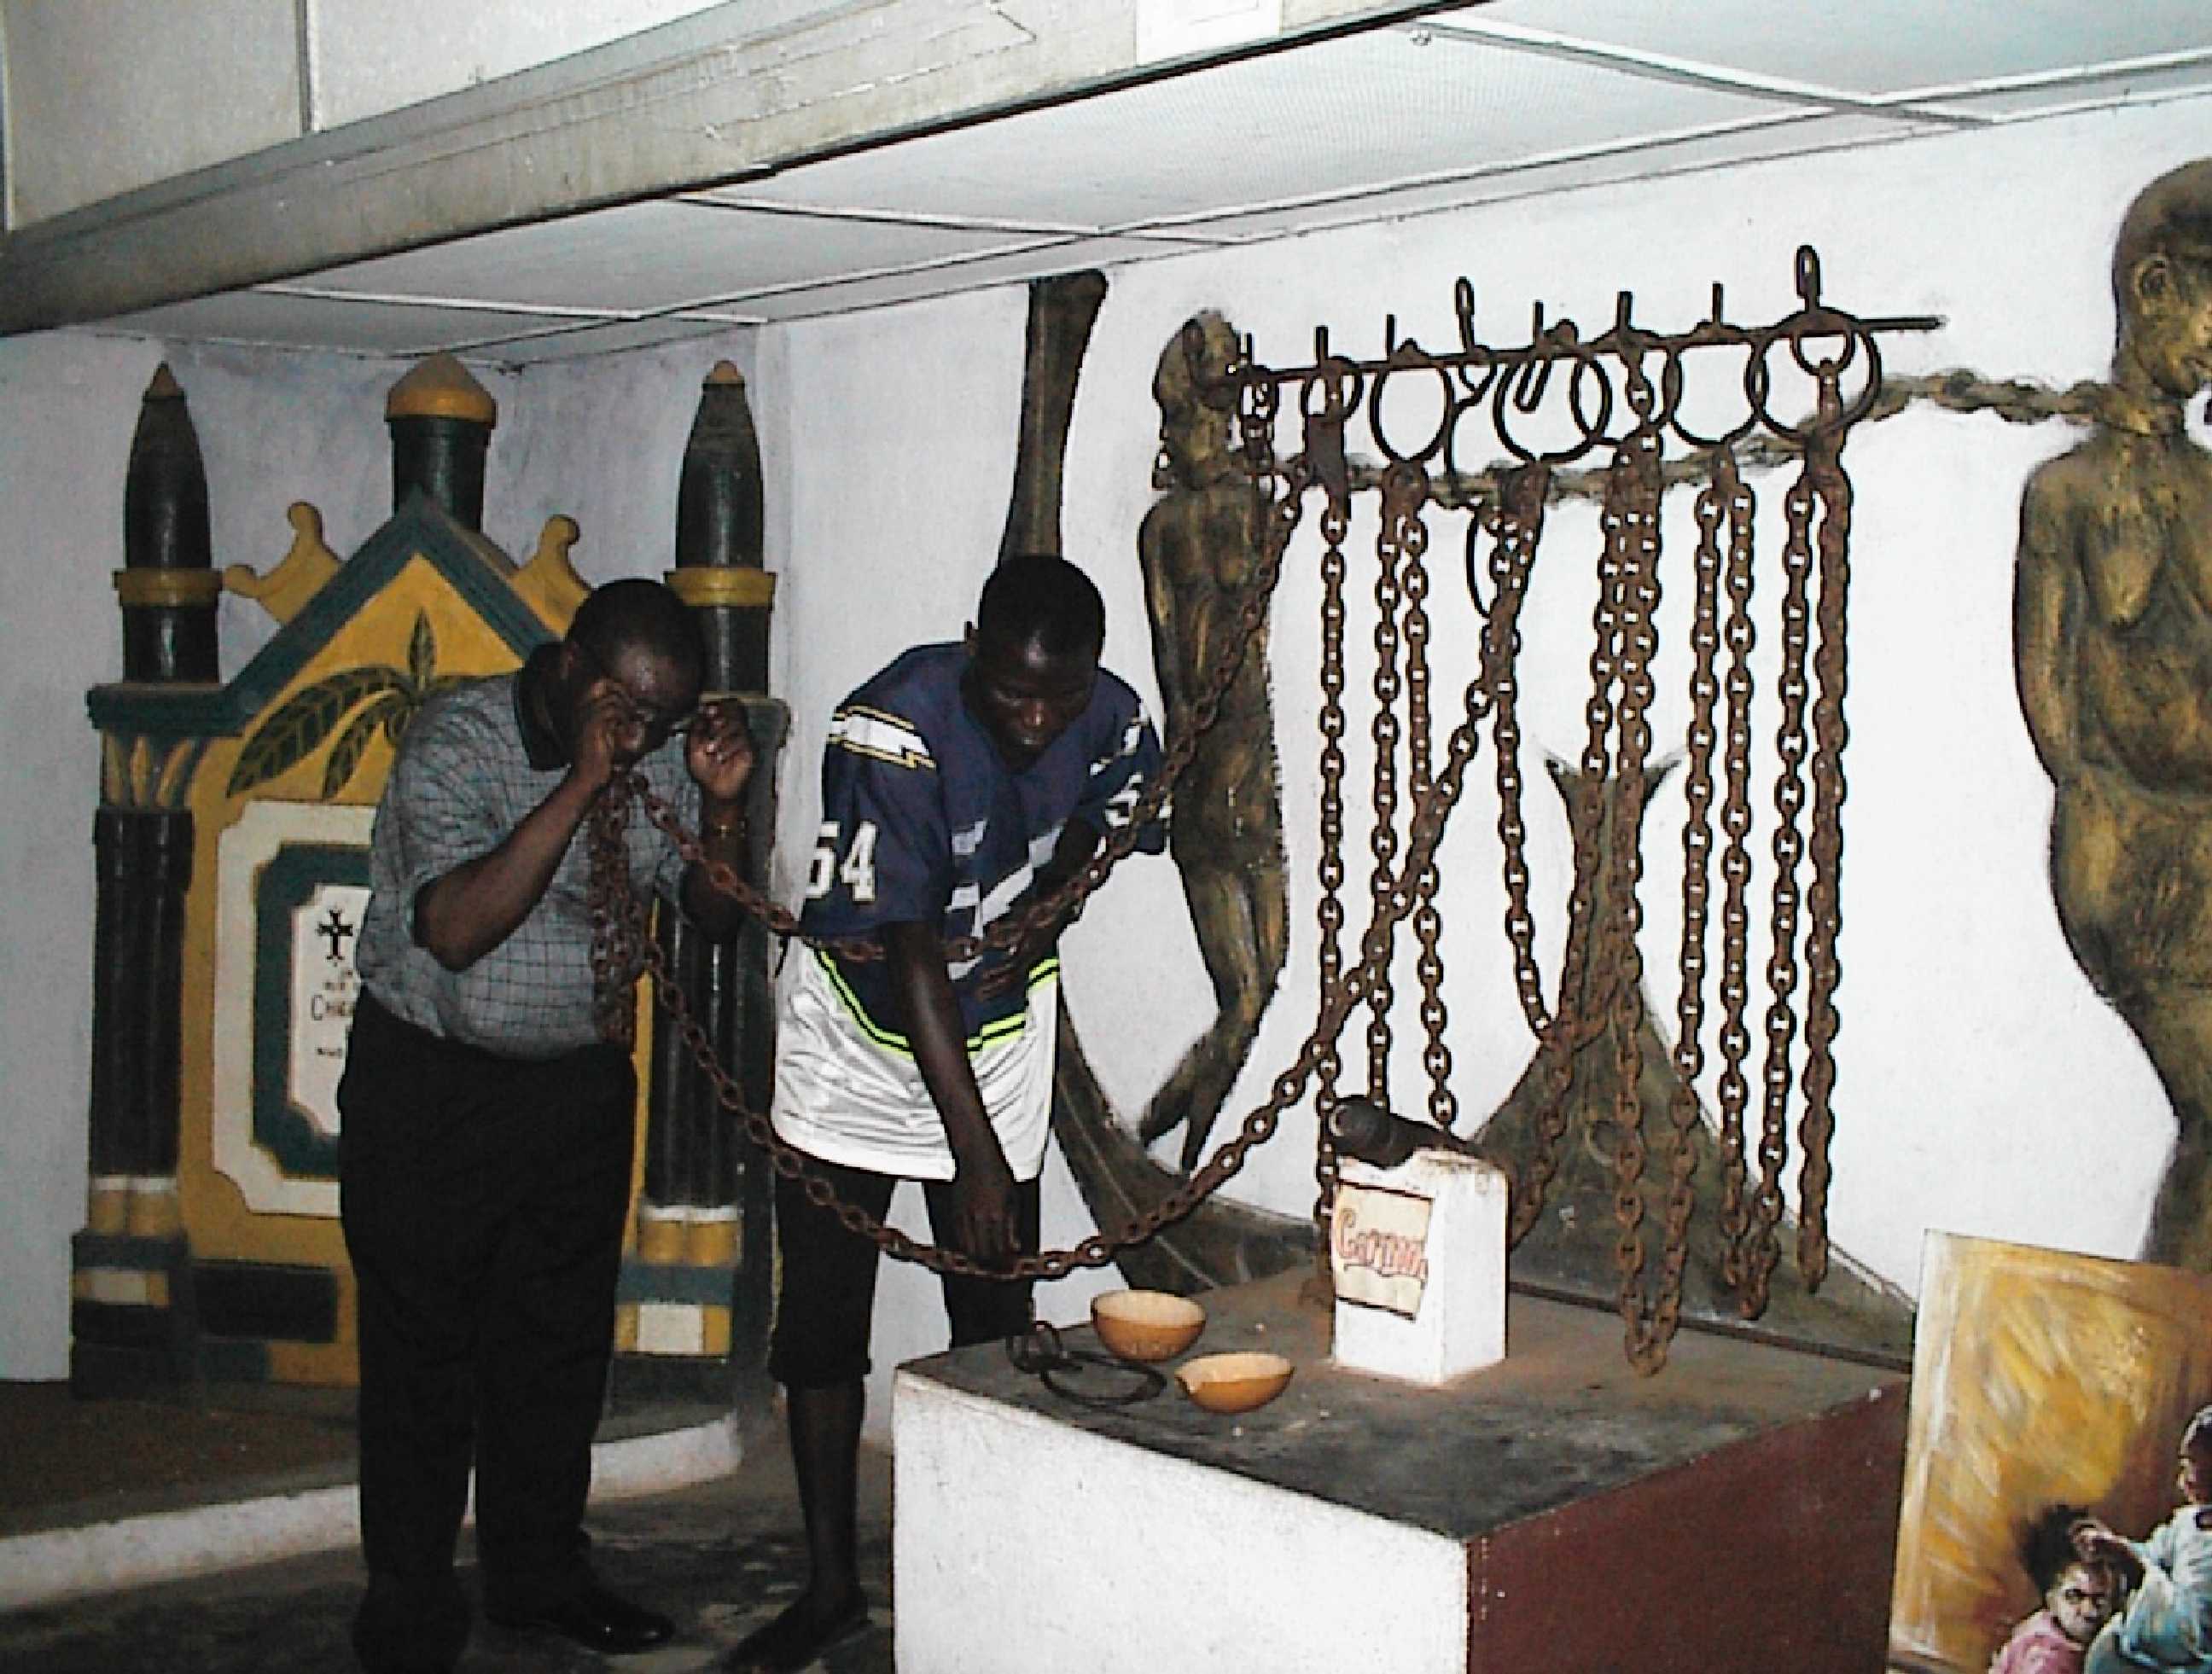 Njoku trying out the chains in the Mobe Family House Museum